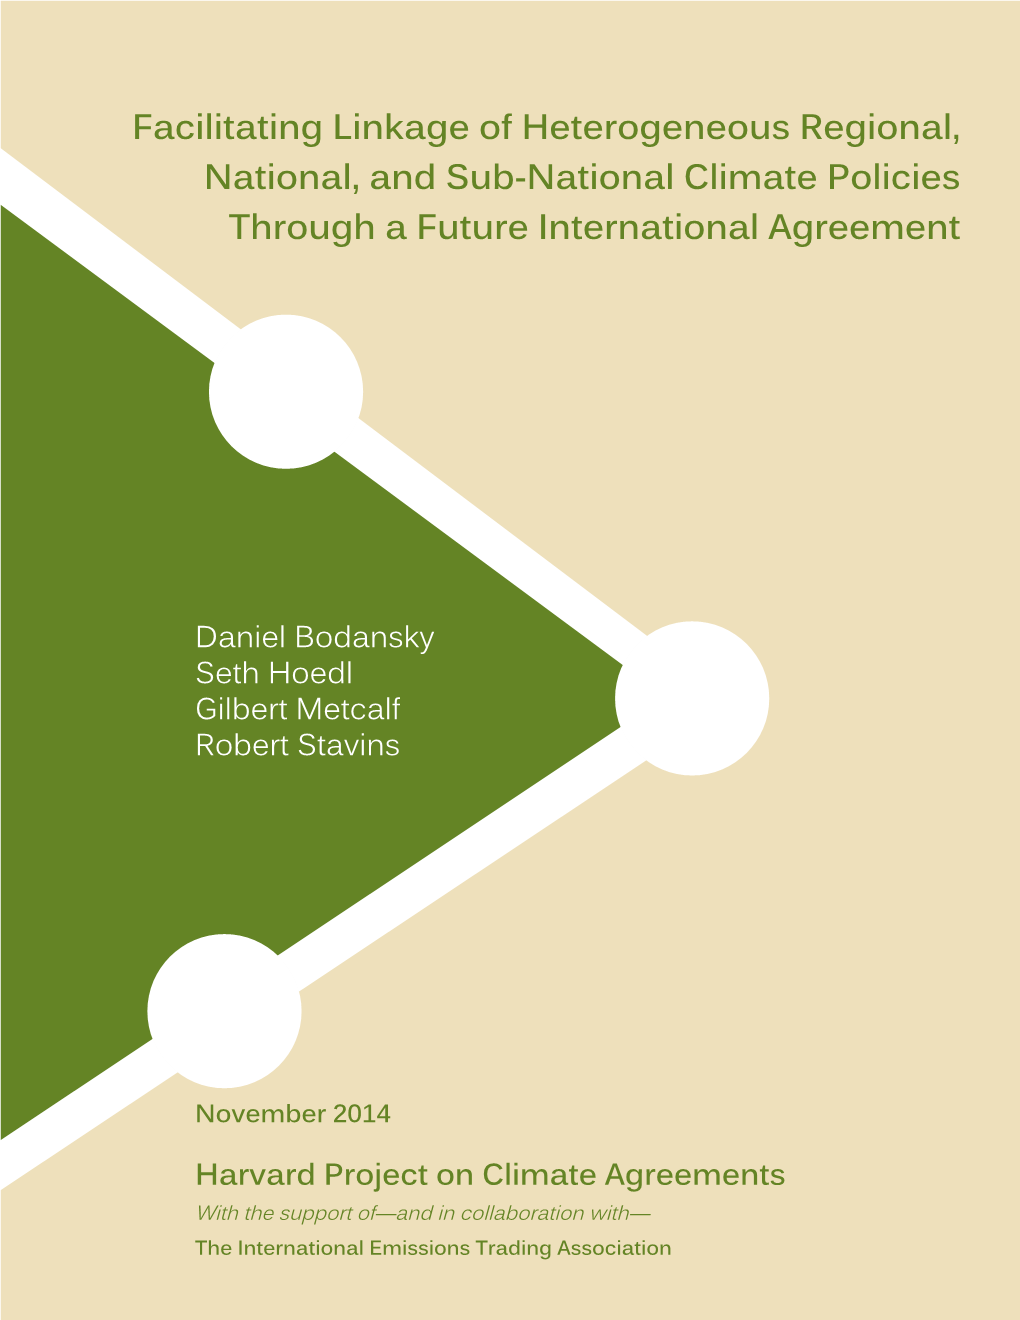 Facilitating Linkage of Heterogeneous Regional, National, and Sub-National Climate Policies Through a Future International Agreement